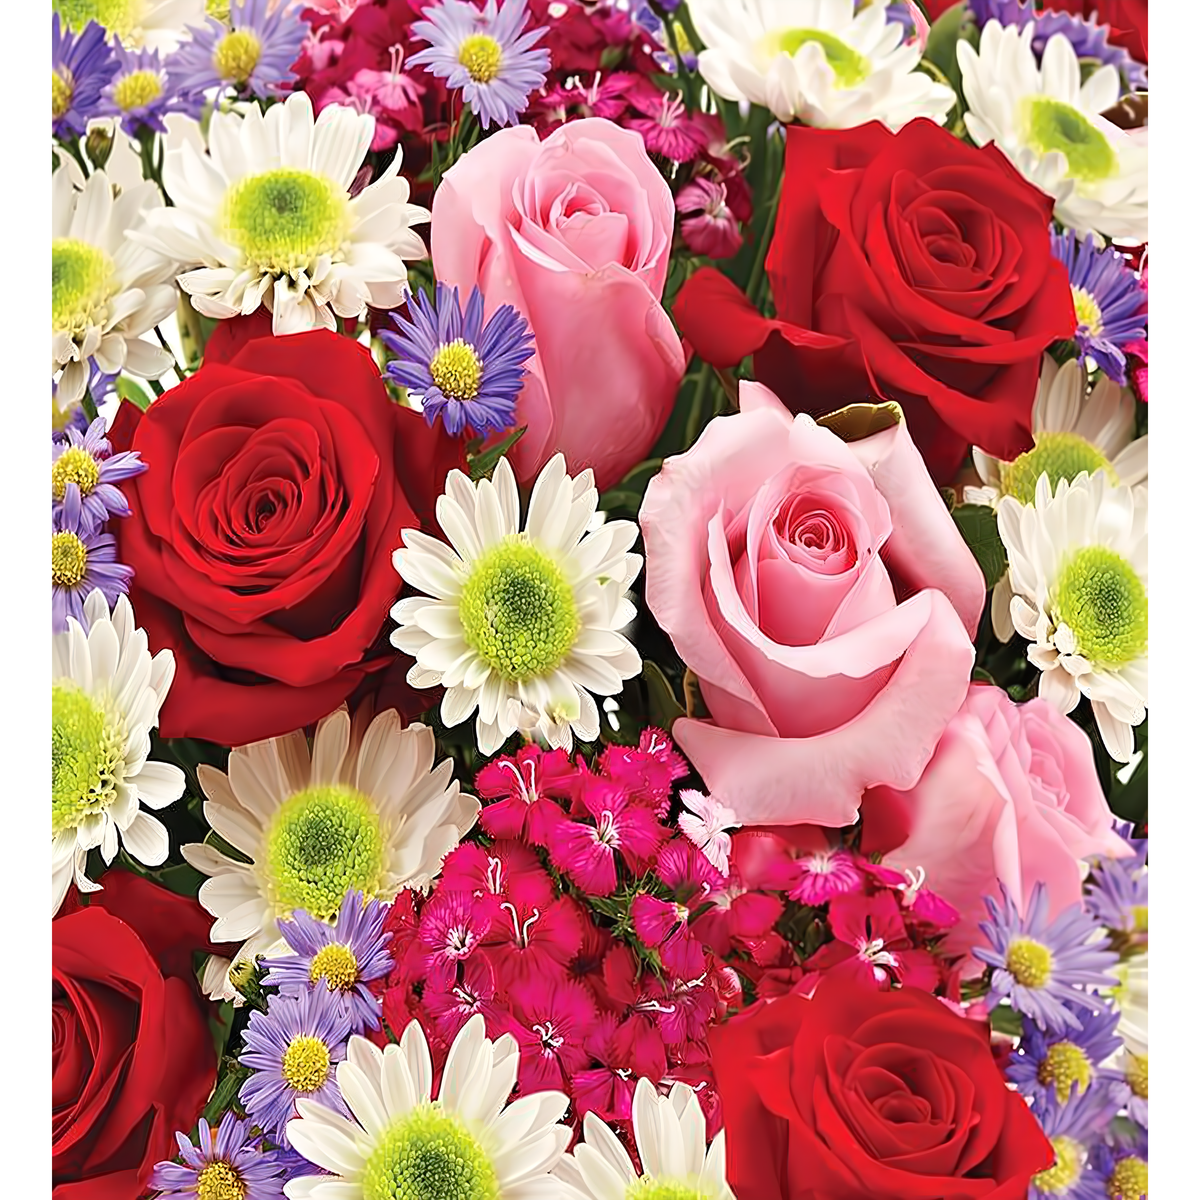 Manhattan Flower Delivery - Florist Choice - Occasions &gt; Anniversary